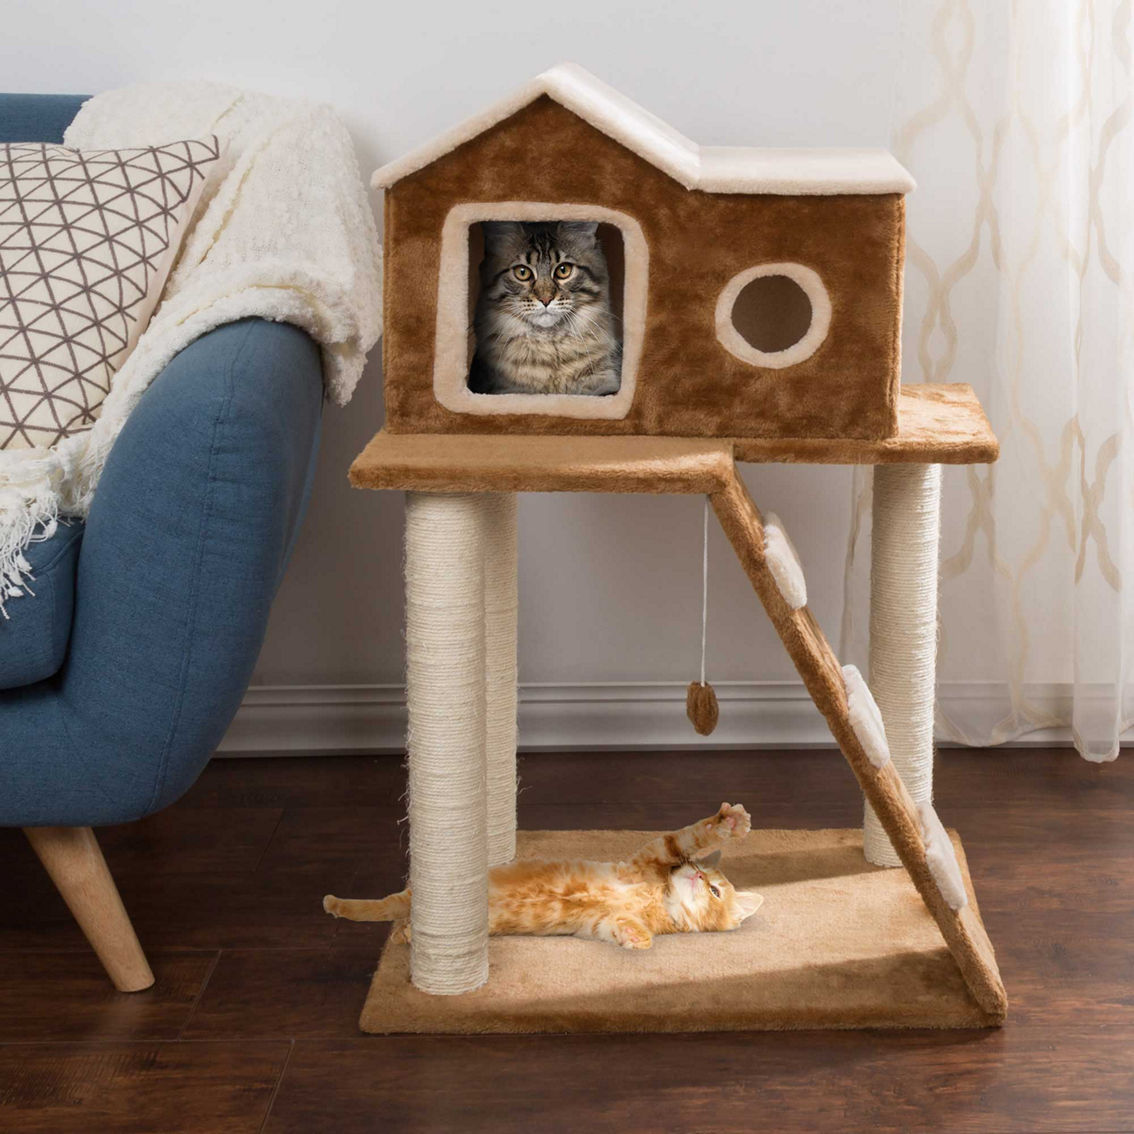 Petmaker 4 Tier Cat Tree with Penthouse Condo - Image 2 of 2